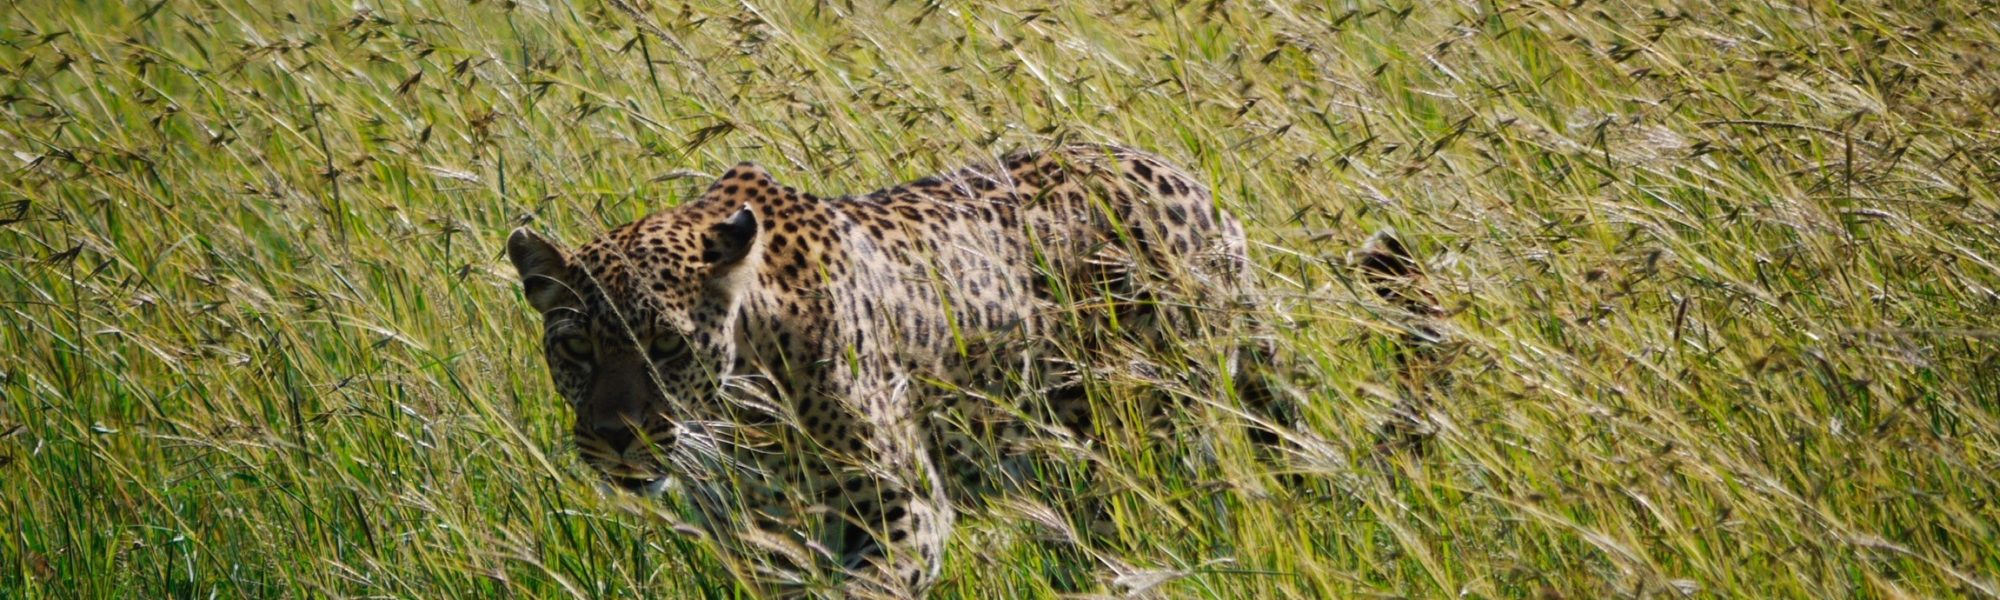 Leopard in the grass by Gabe Ashton - Jules client